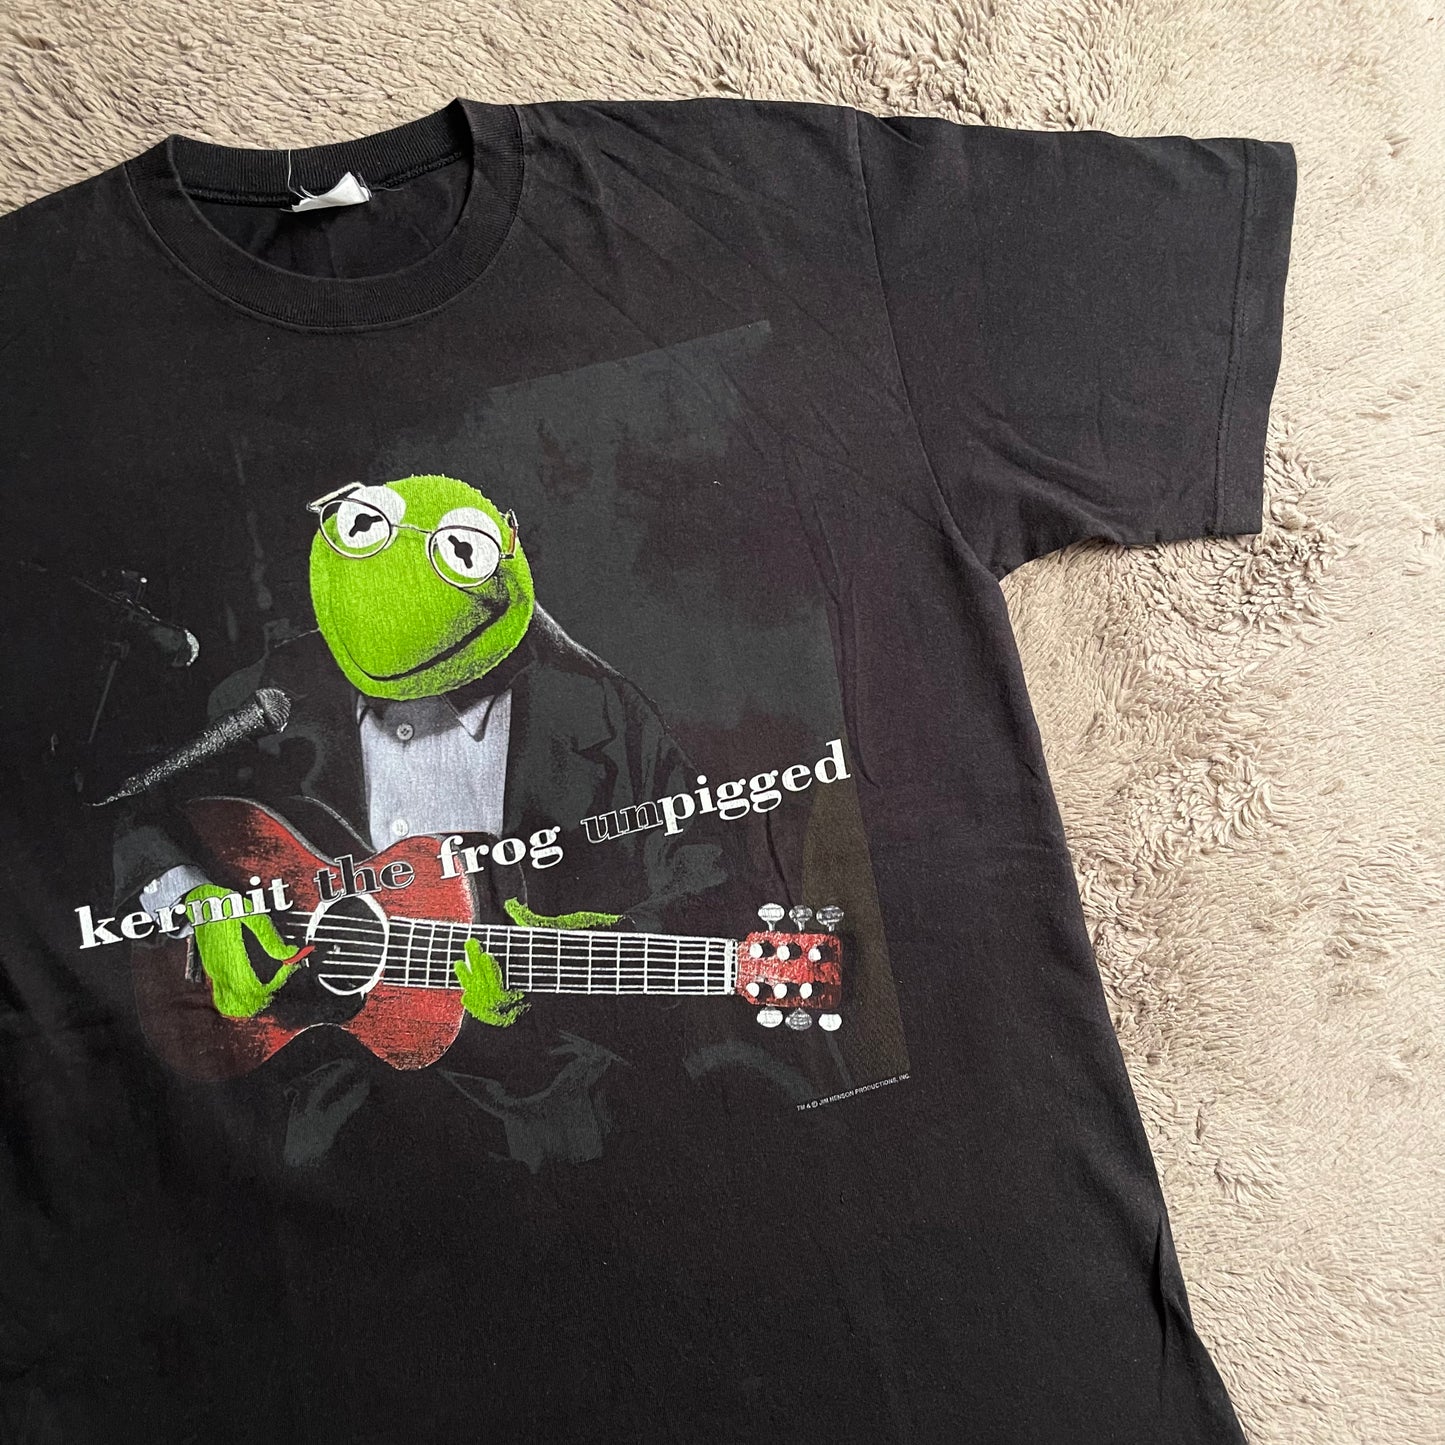 The Muppets: Kermit the frog Unpigged Vintage Tee (XL)